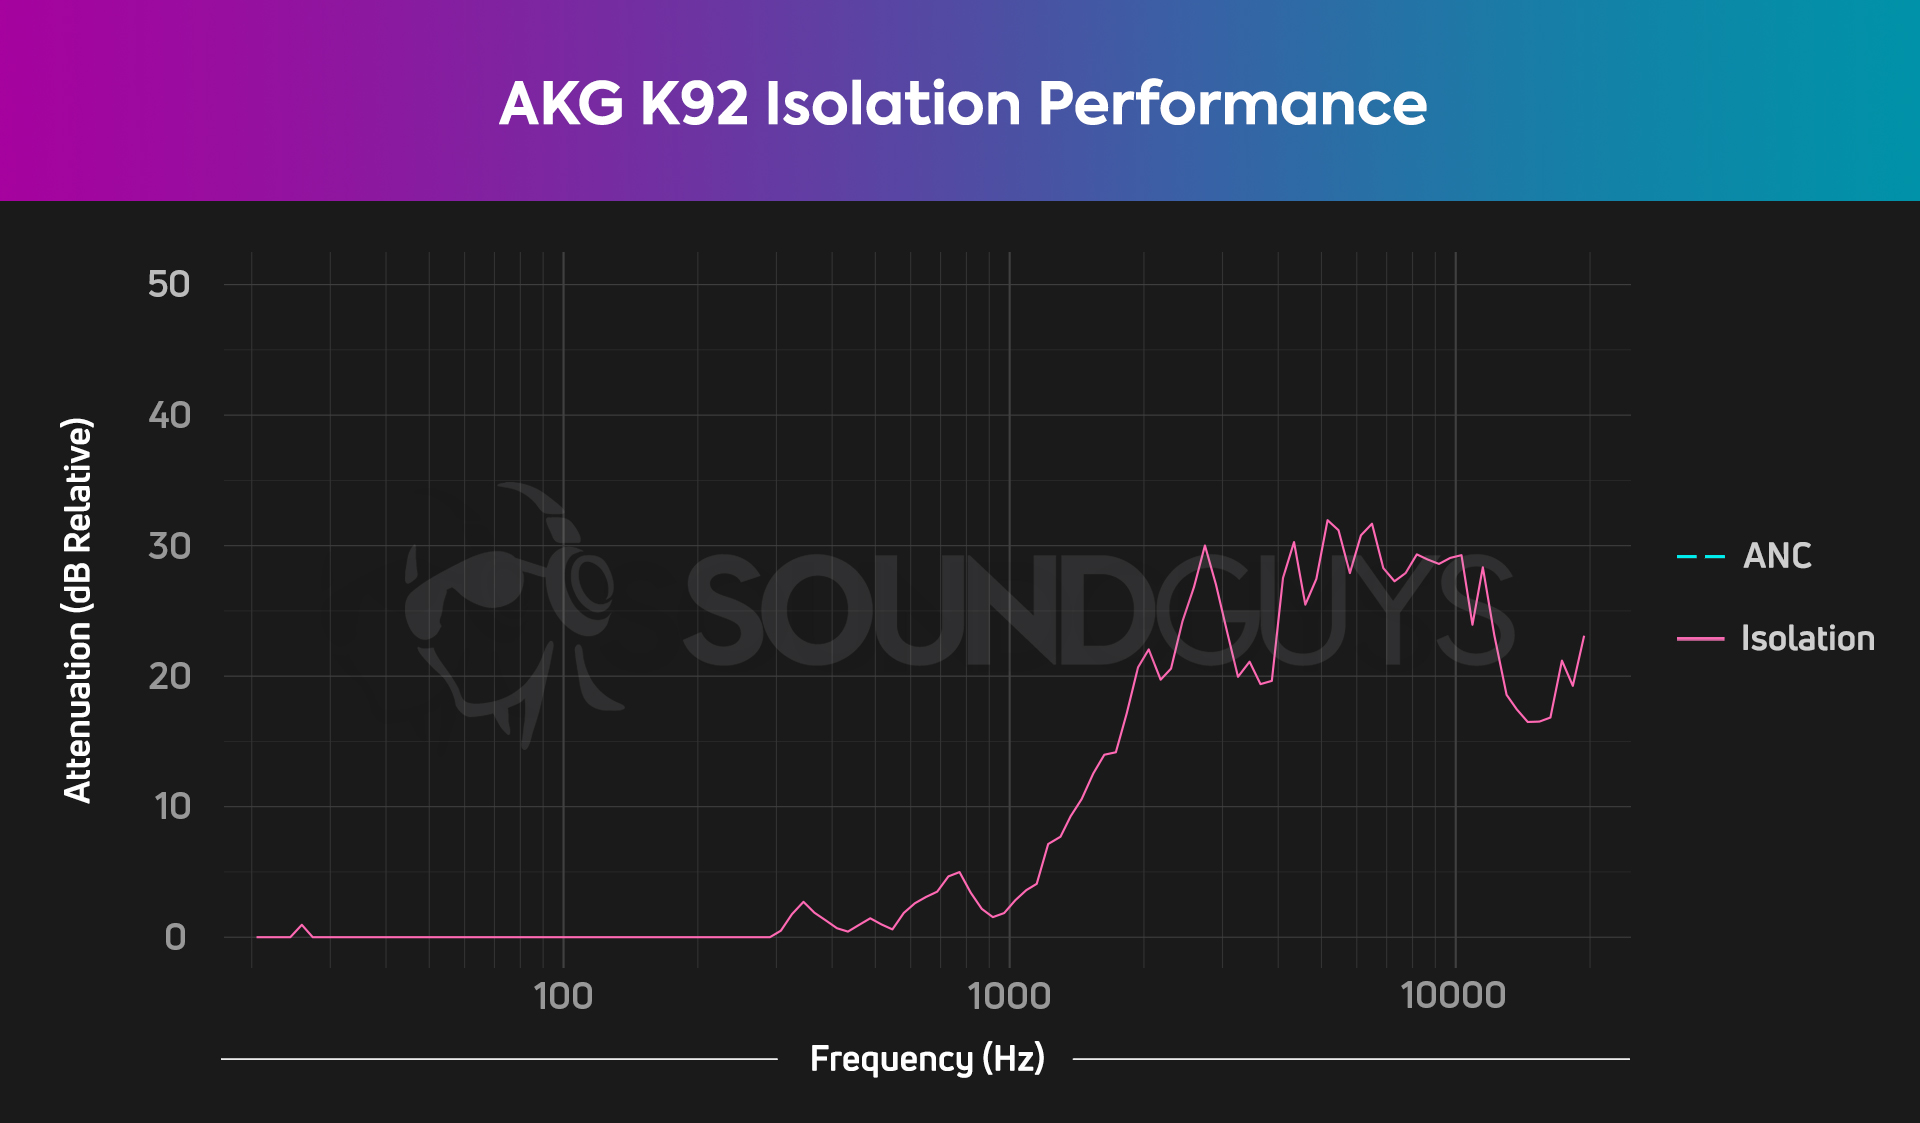 A chart showing the AKG K92 attenuating noise above 1kHz